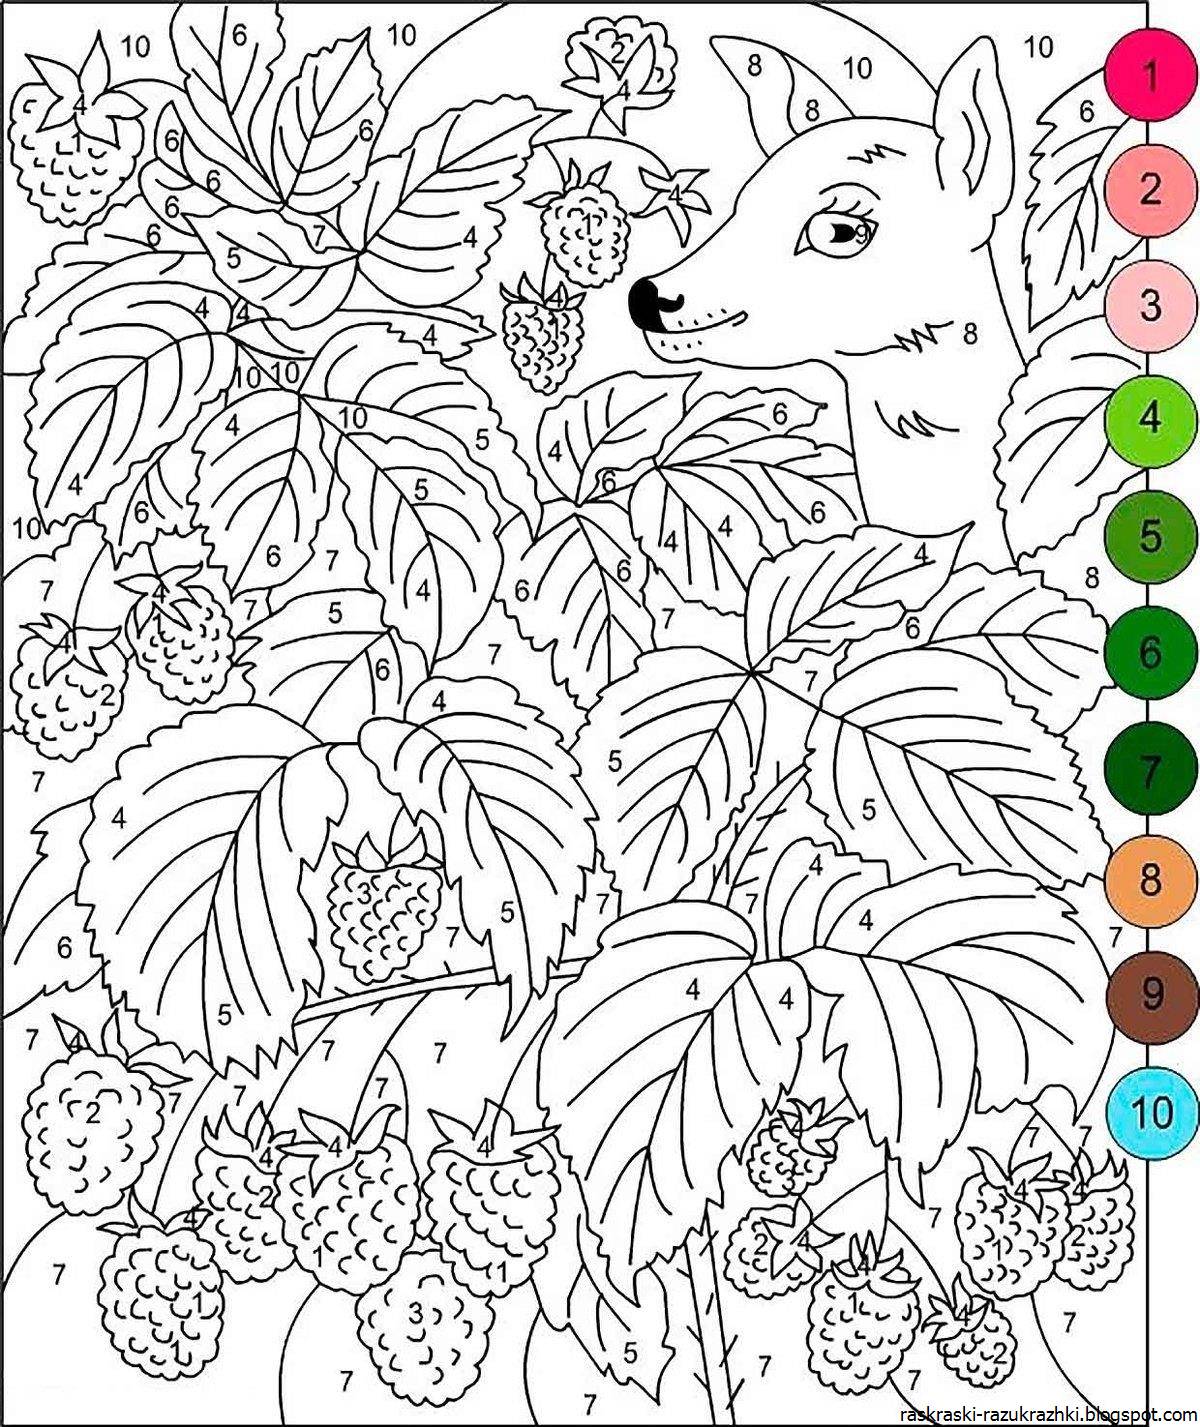 Live coloring by numbers